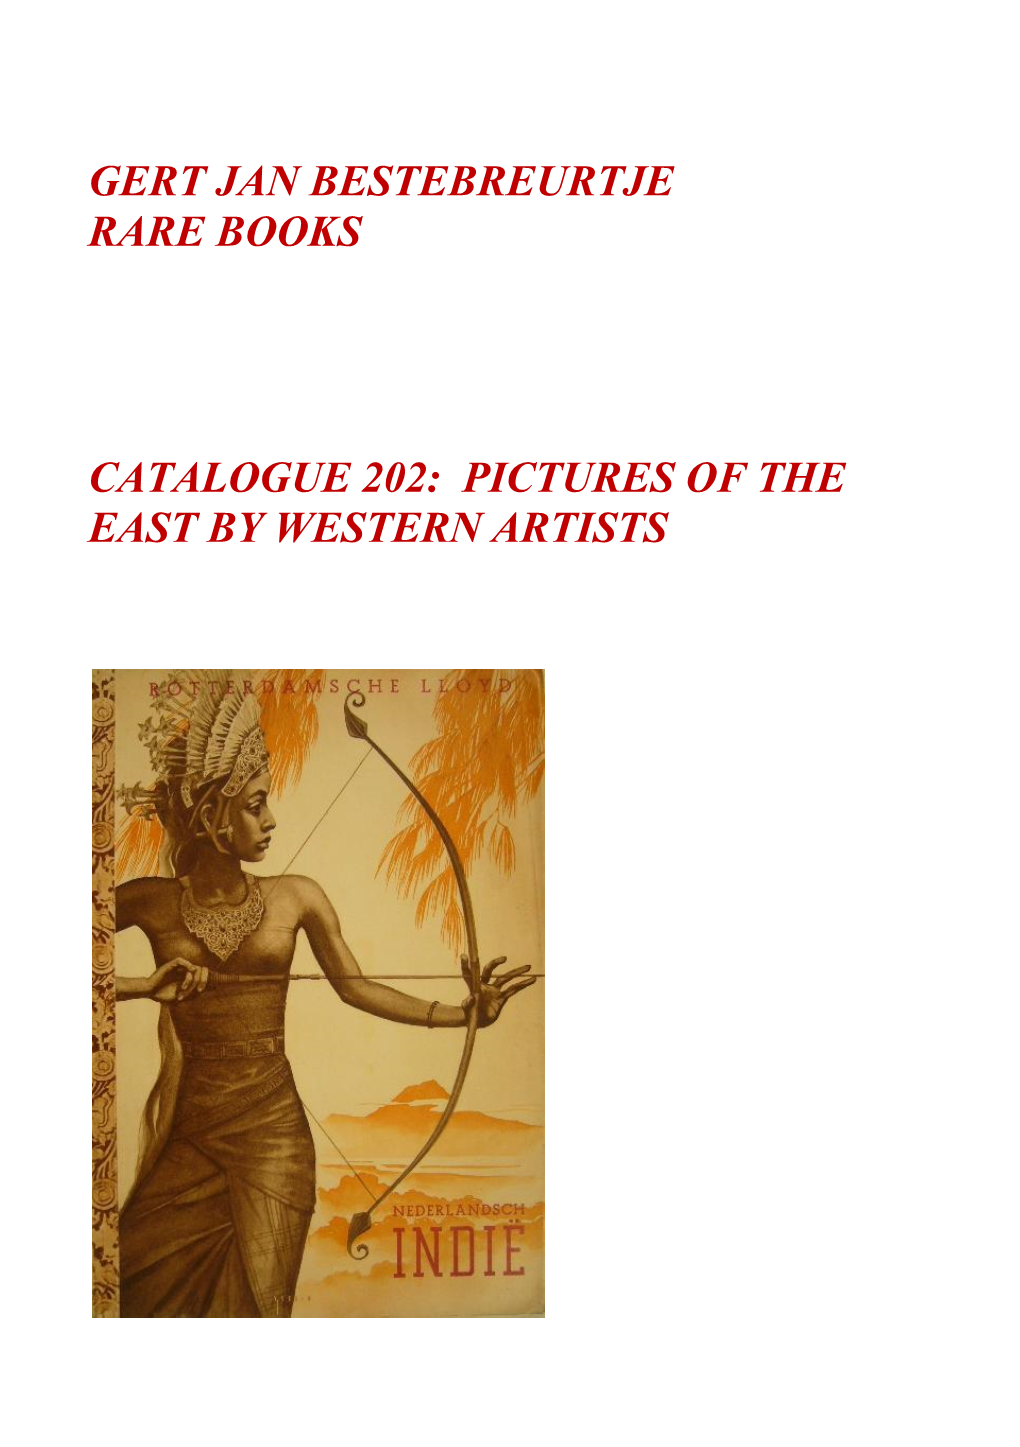 Gert Jan Bestebreurtje Rare Books Catalogue 202: Pictures of the East